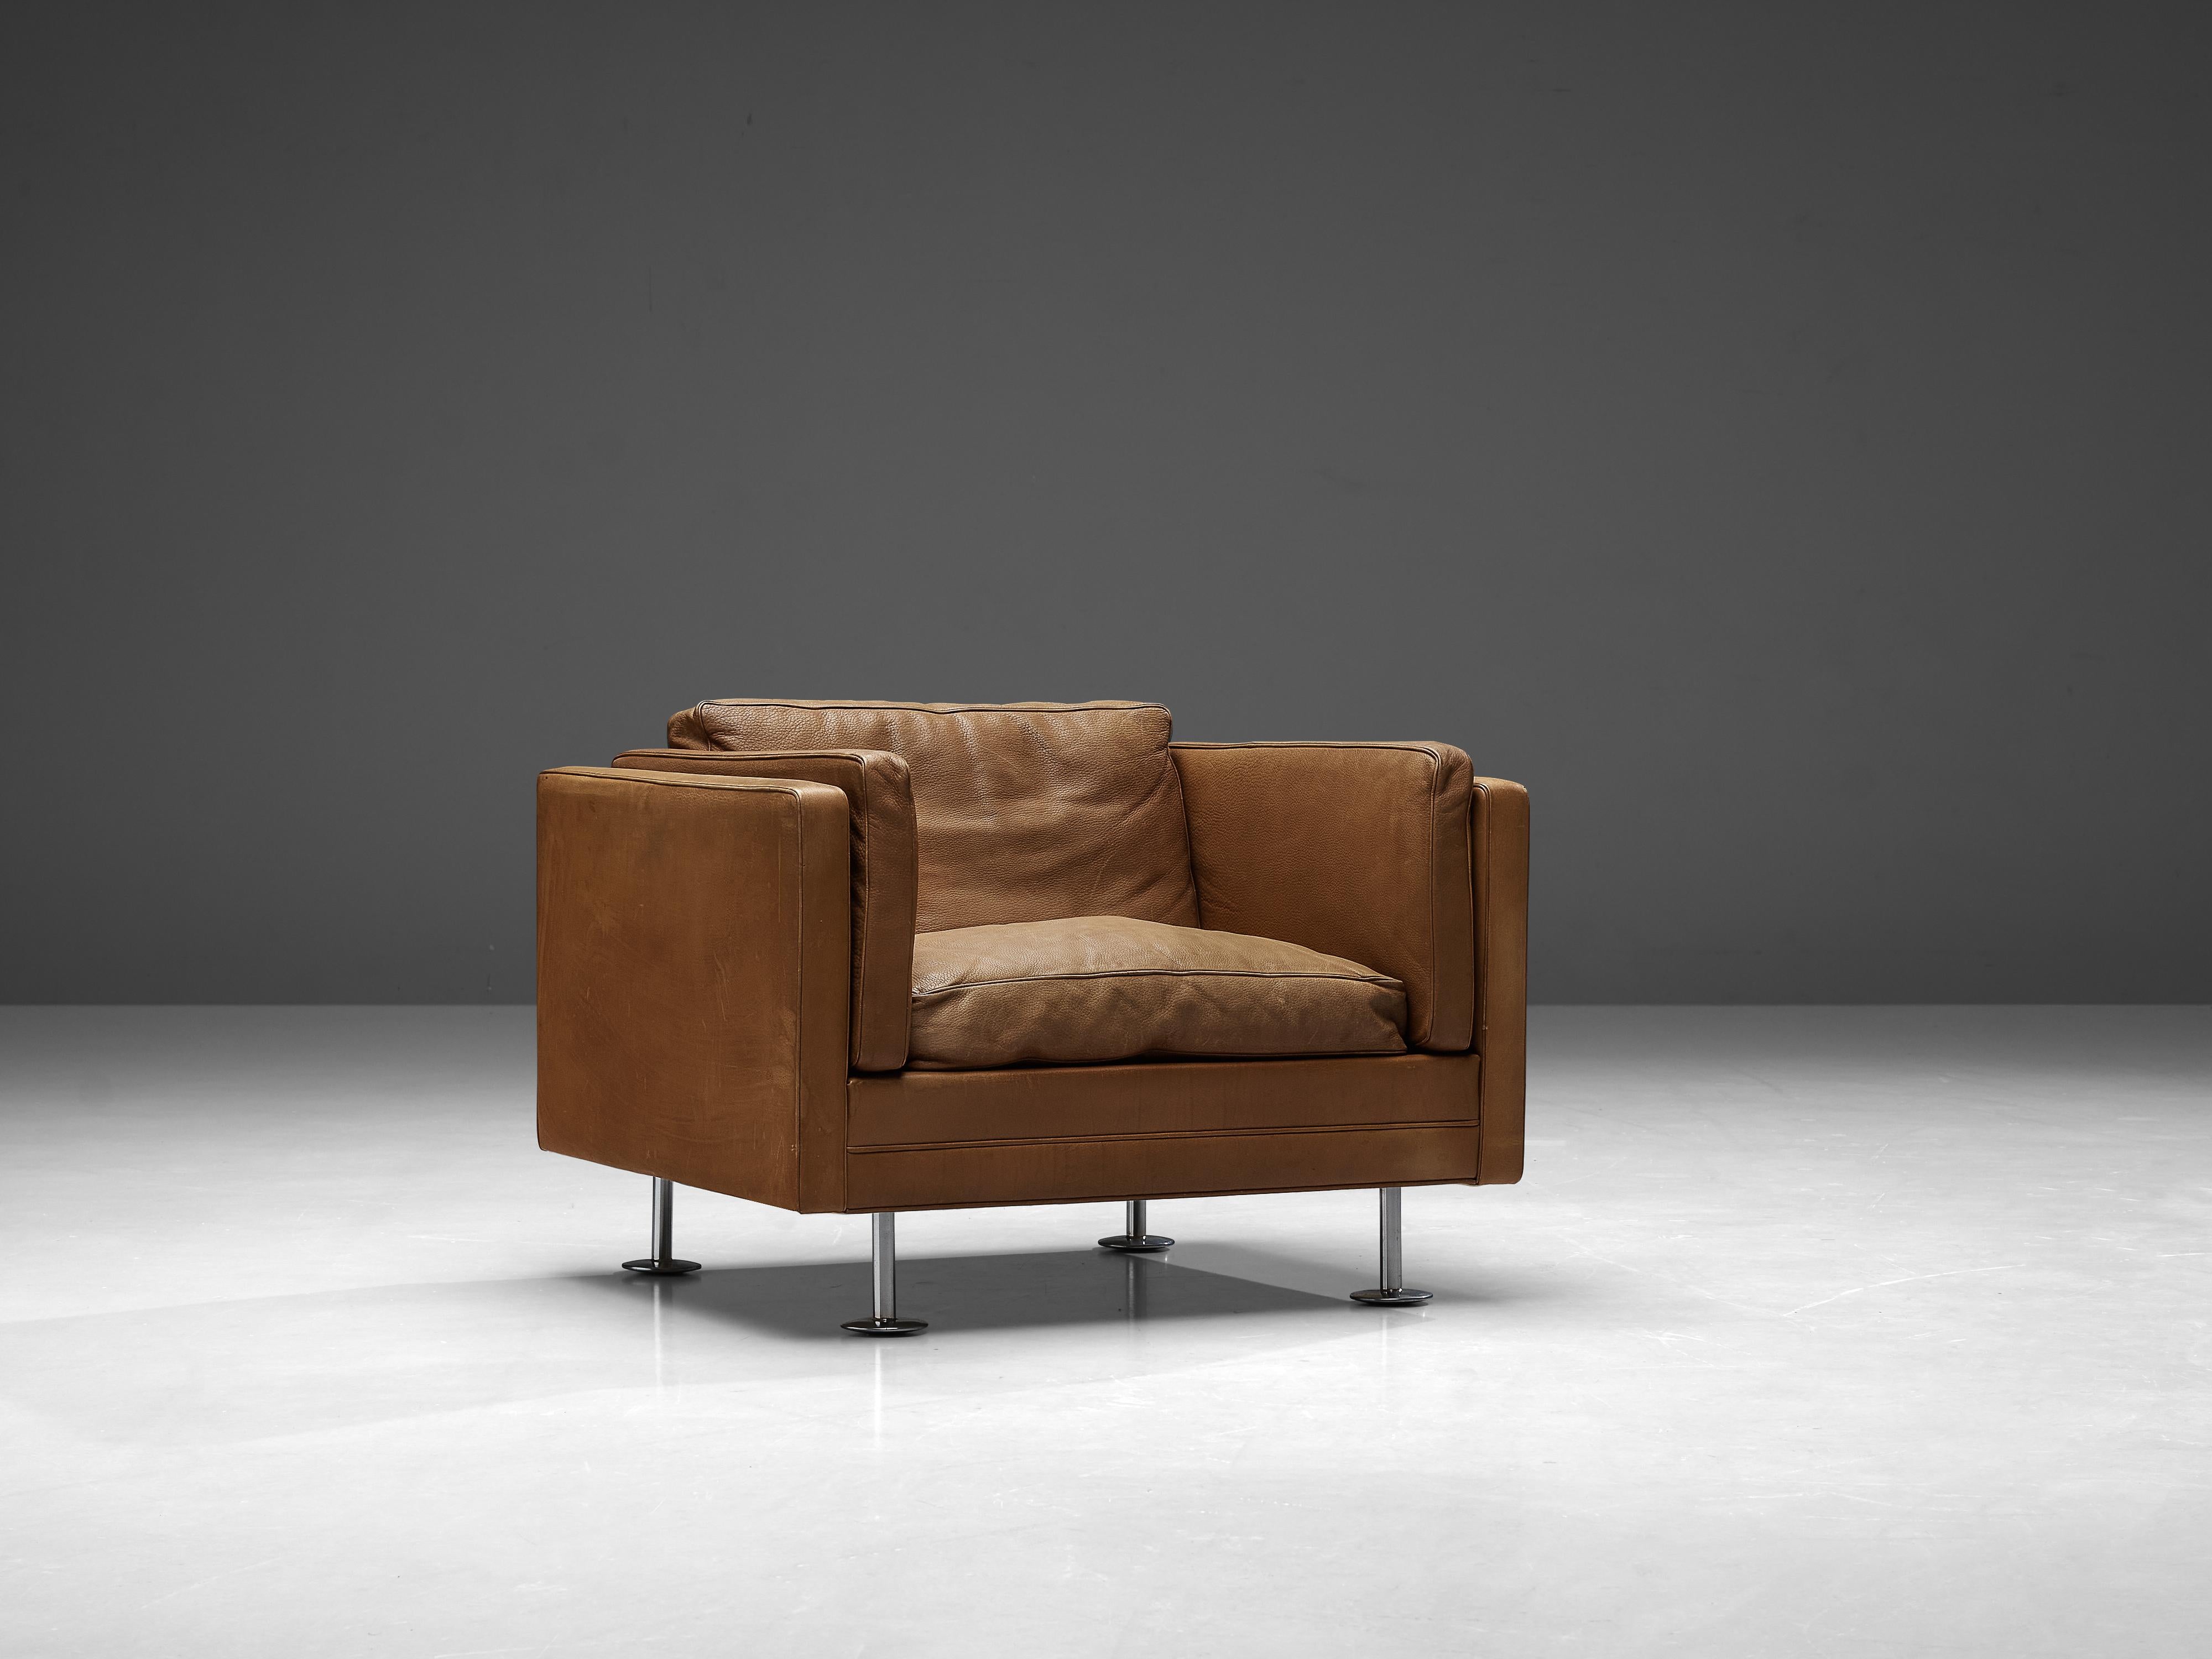 Illum Wikkelsø, lounge chair, leather, stainless steel, Denmark, 1960s. 

Easy chair in cognac leather, by Danish designer Illum Wikkelsø. This club chair has a cubic design. The tight and clean outside is complemented with a soft and comfortable